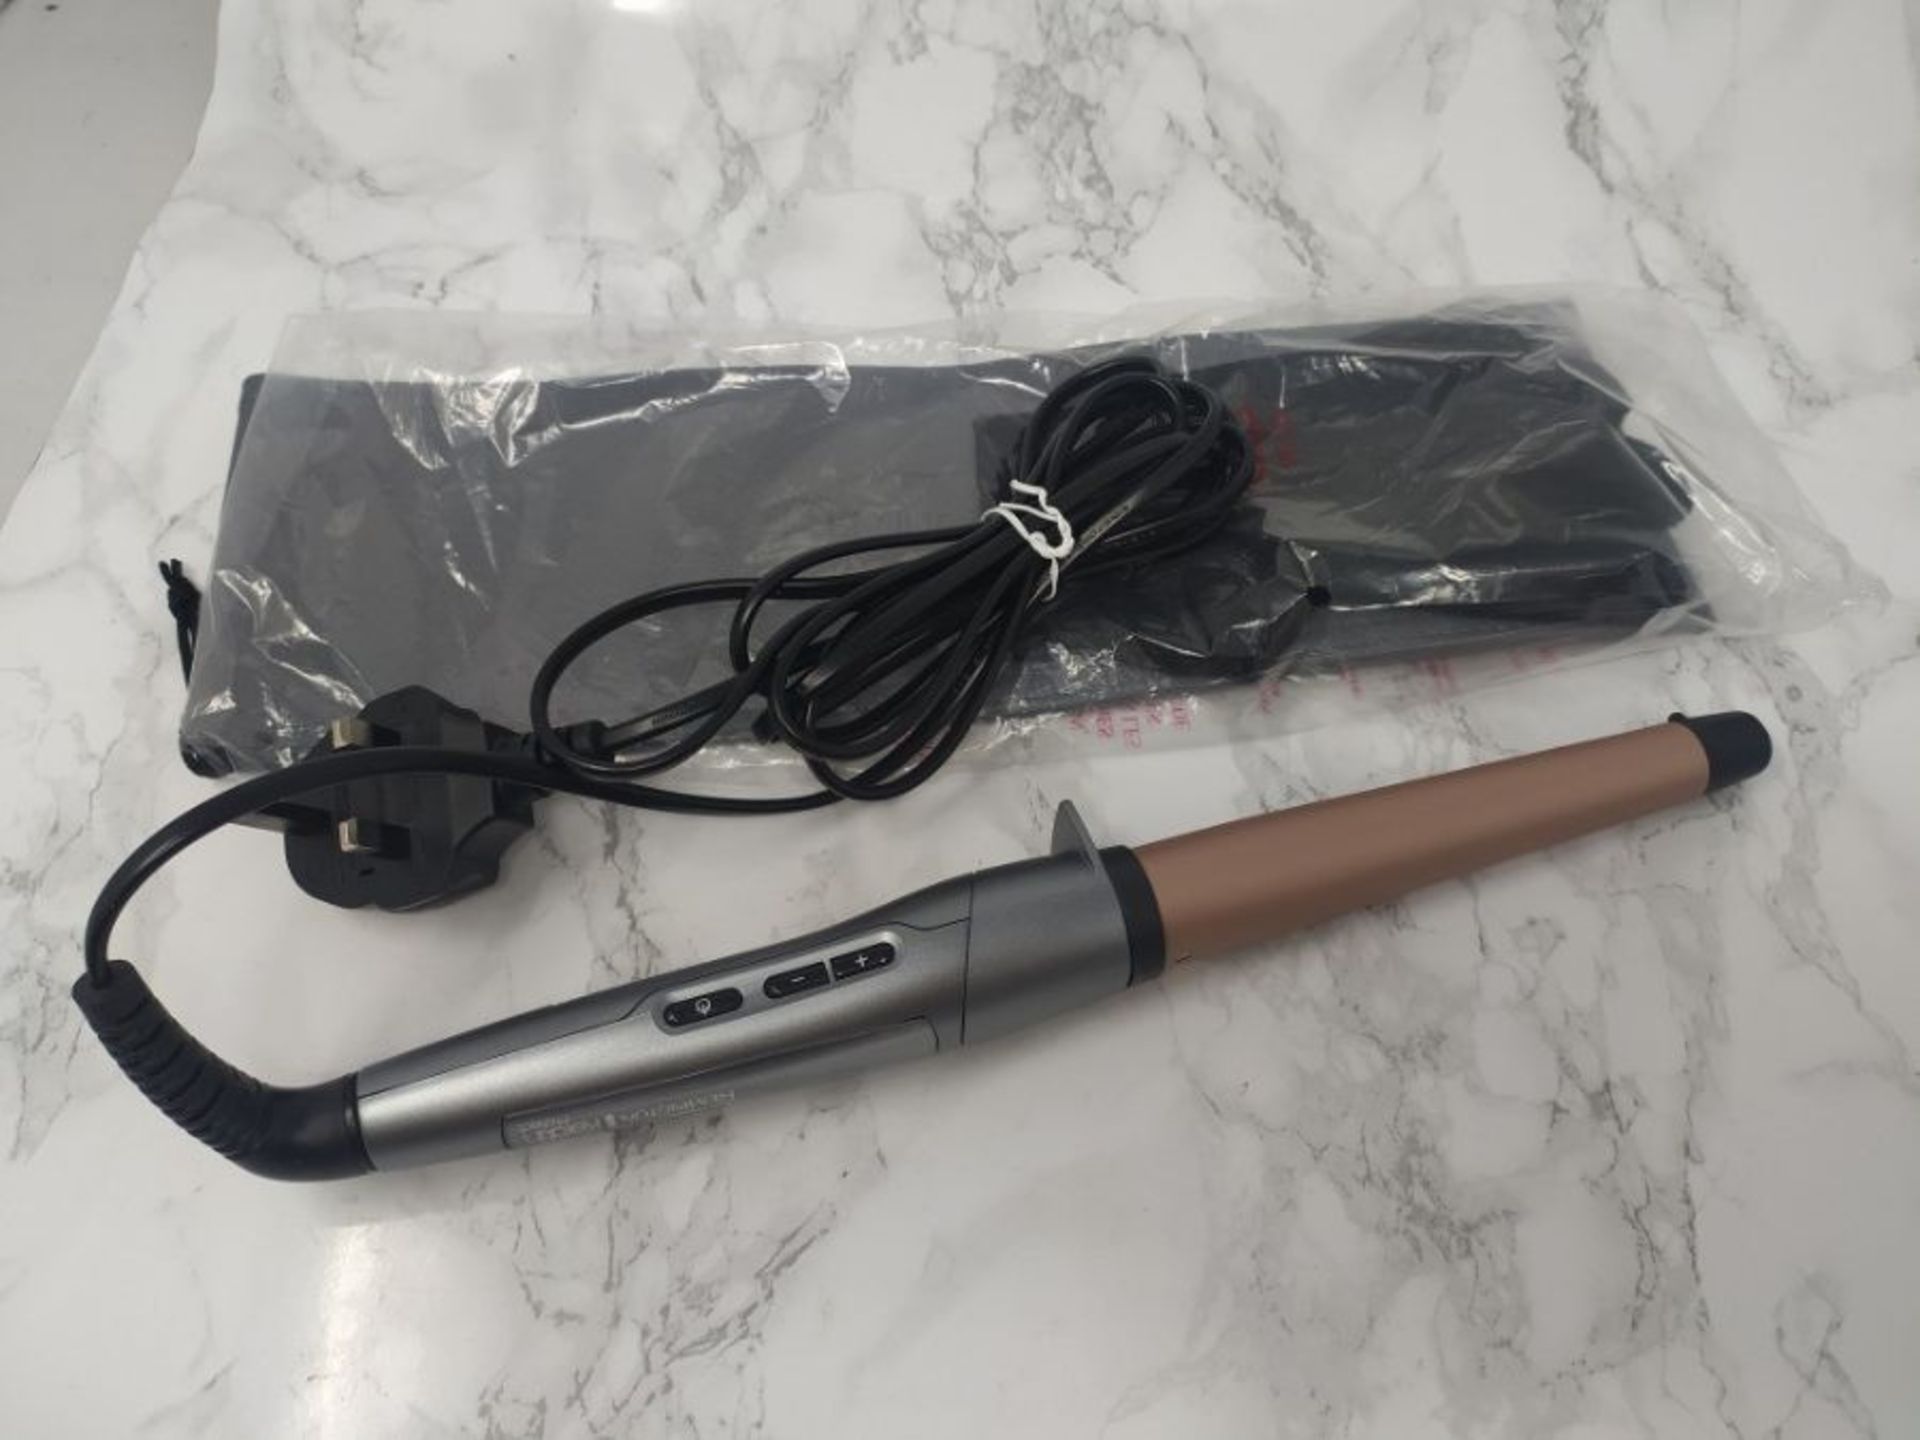 Remington Keratin Protect Hair Curling Wand, Infused with Keratin and Almond Oil for H - Image 3 of 3